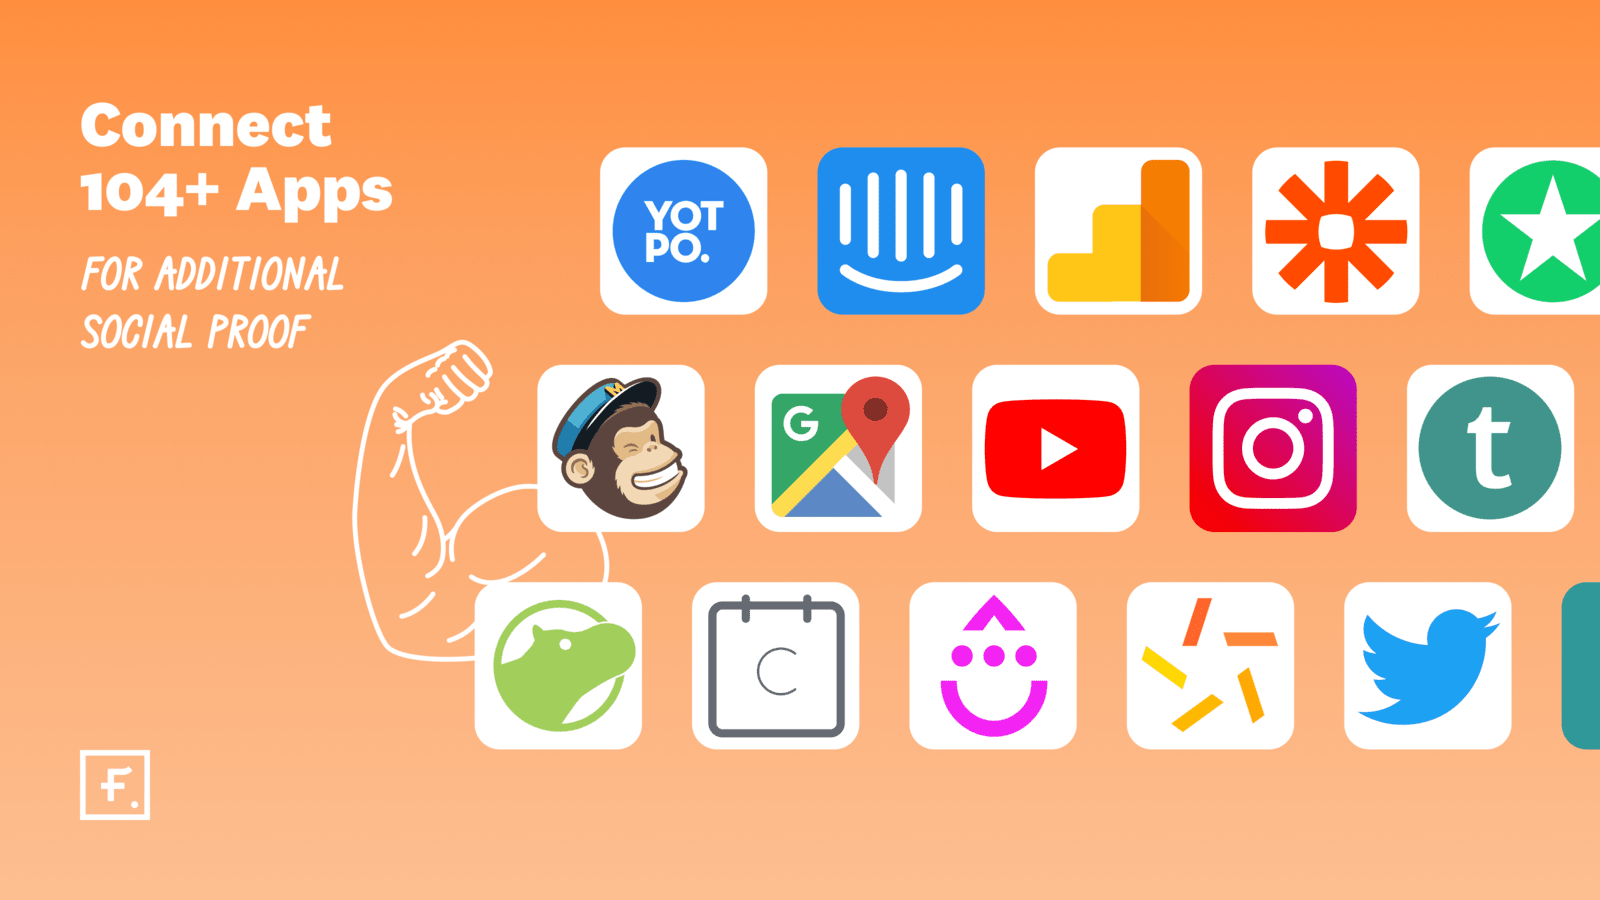 100+ Integrations: Connect with your favorite apps